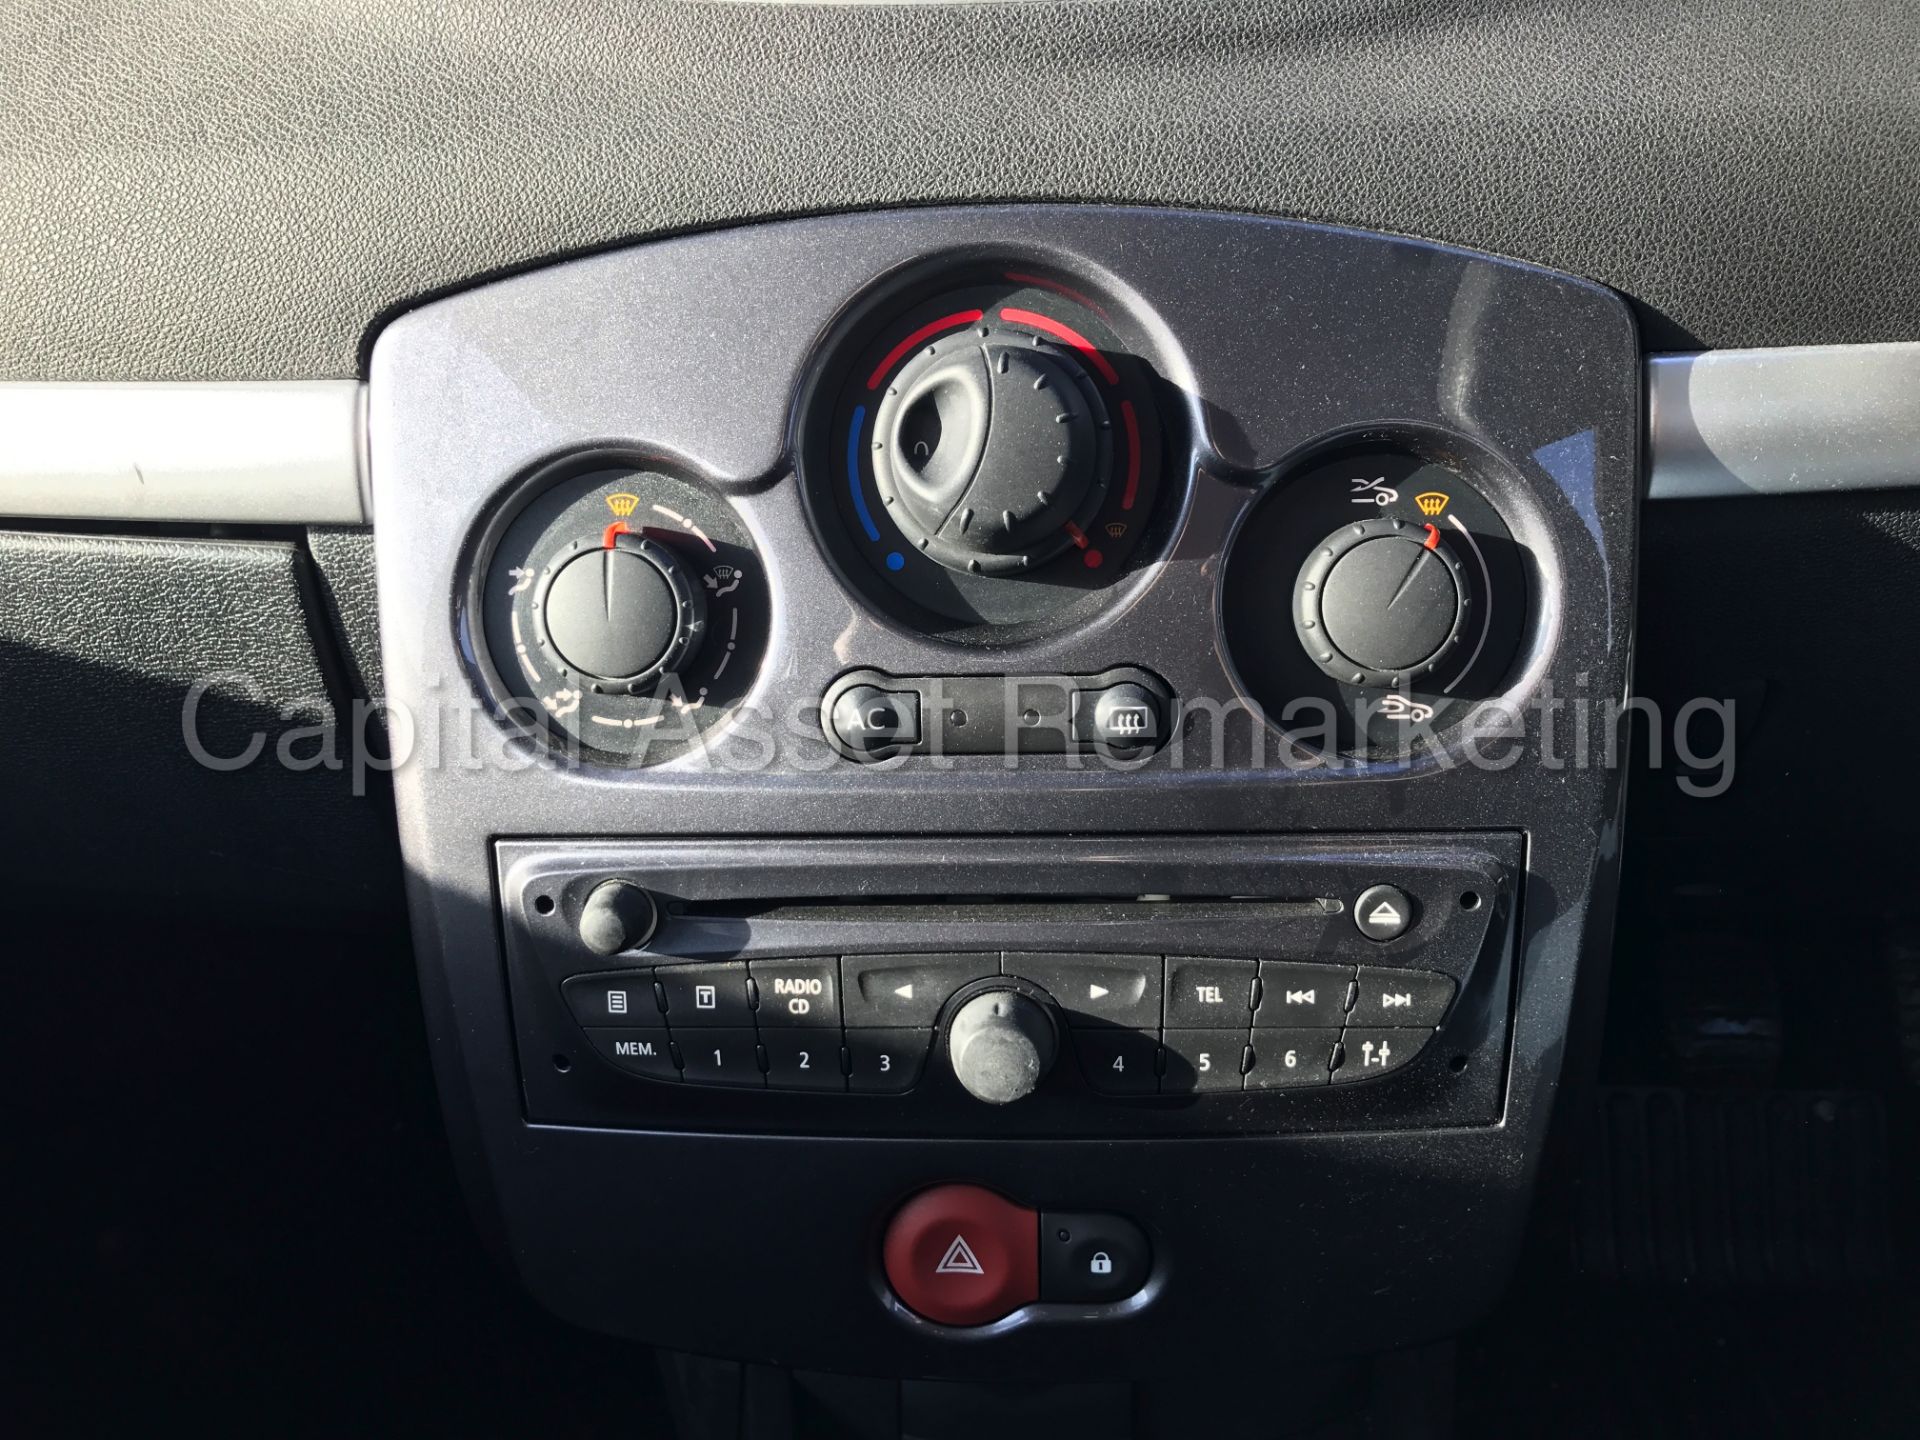 RENAULT CLIO 'EXPRESSION PLUS' (2013 MODEL) '1.5 DCI - A/C - ELEC PACK' (1 OWNER FROM NEW) 60 MPG+ - Image 21 of 22